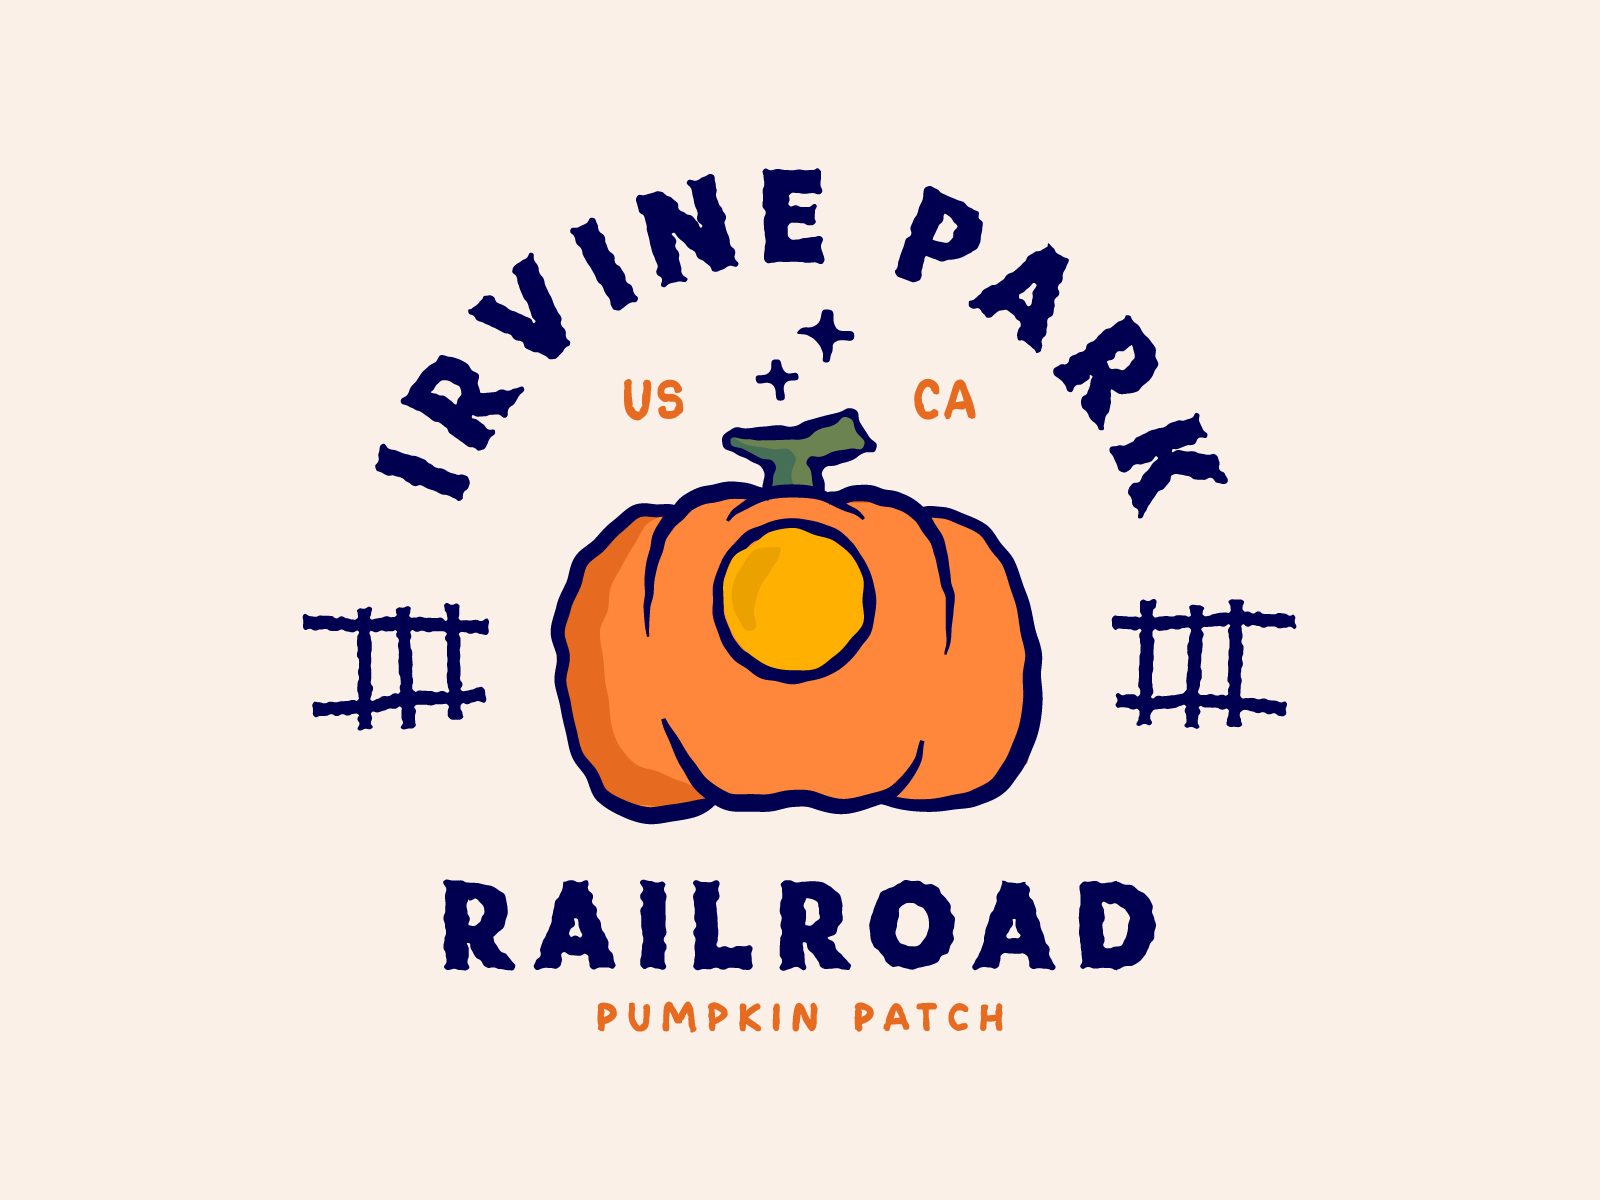 Irvine Park Logo for Pumpkin Patch Event by Wahyu Gautama on Dribbble